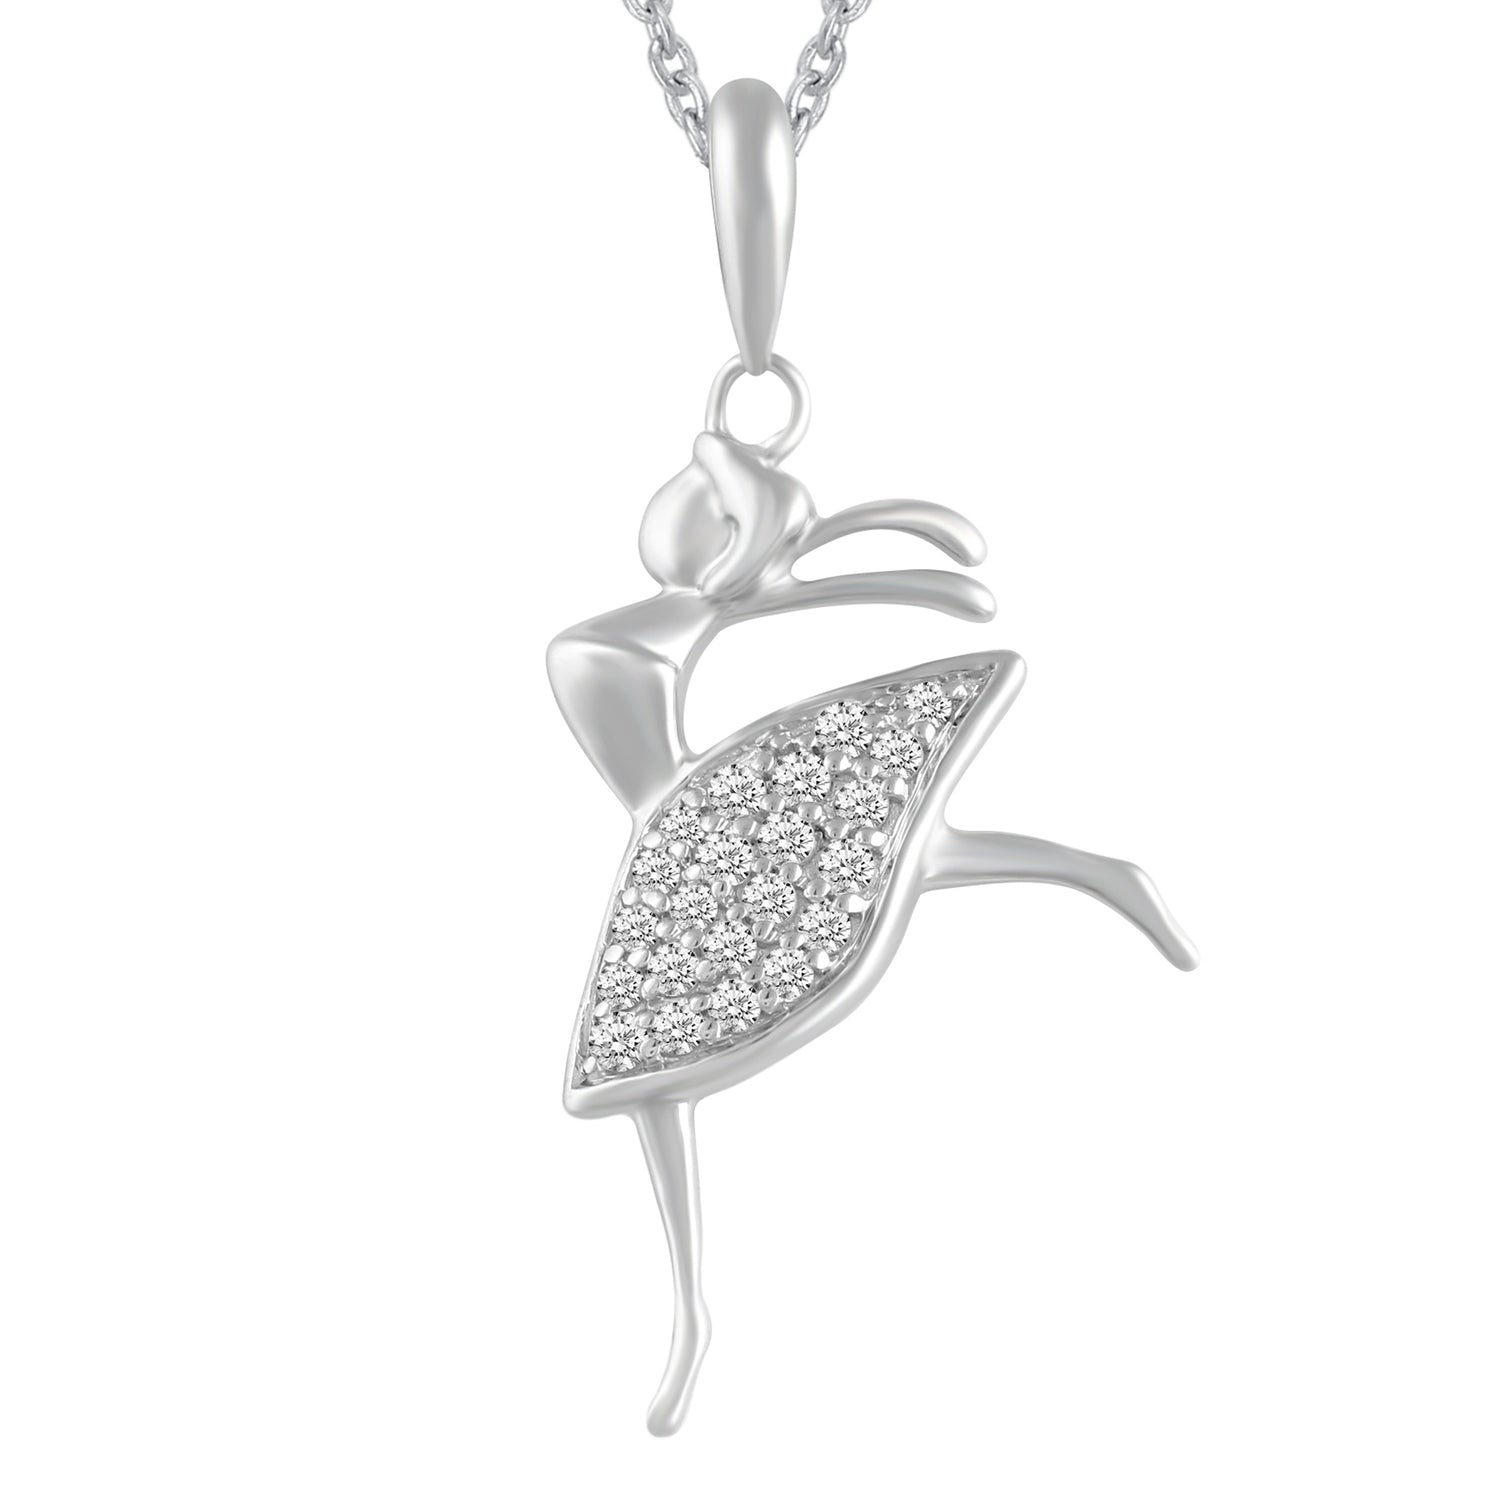 diamond necklace designs for girls